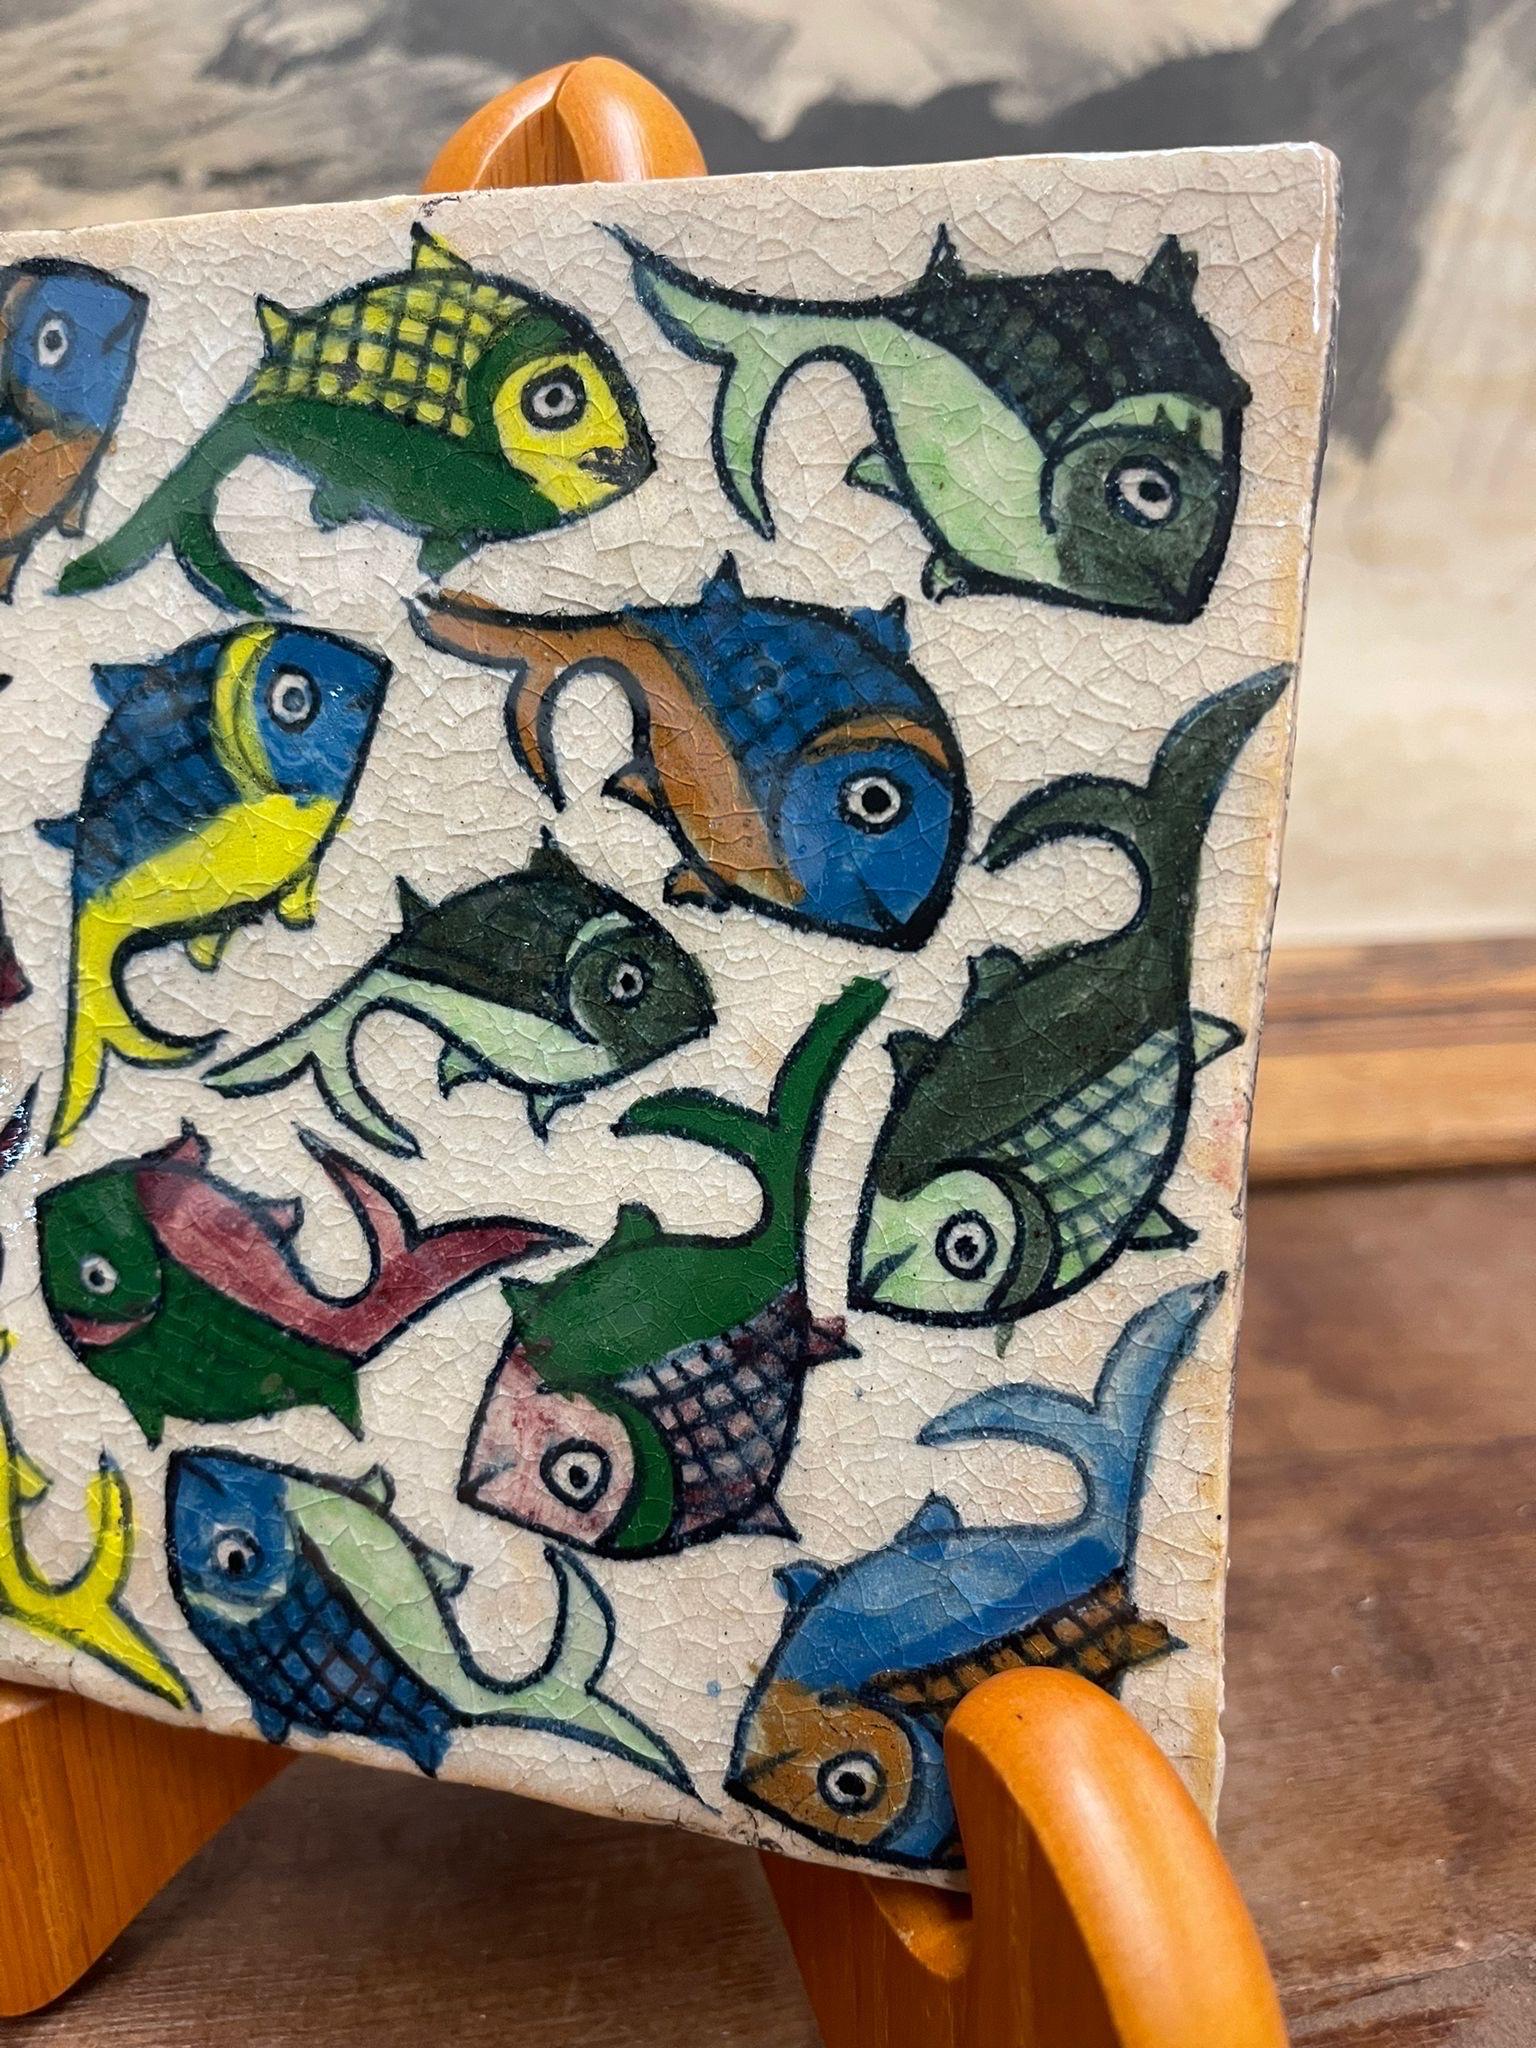 Stone Vintage Hand Painted Italian Tile With Swimming Fish Motif. For Sale